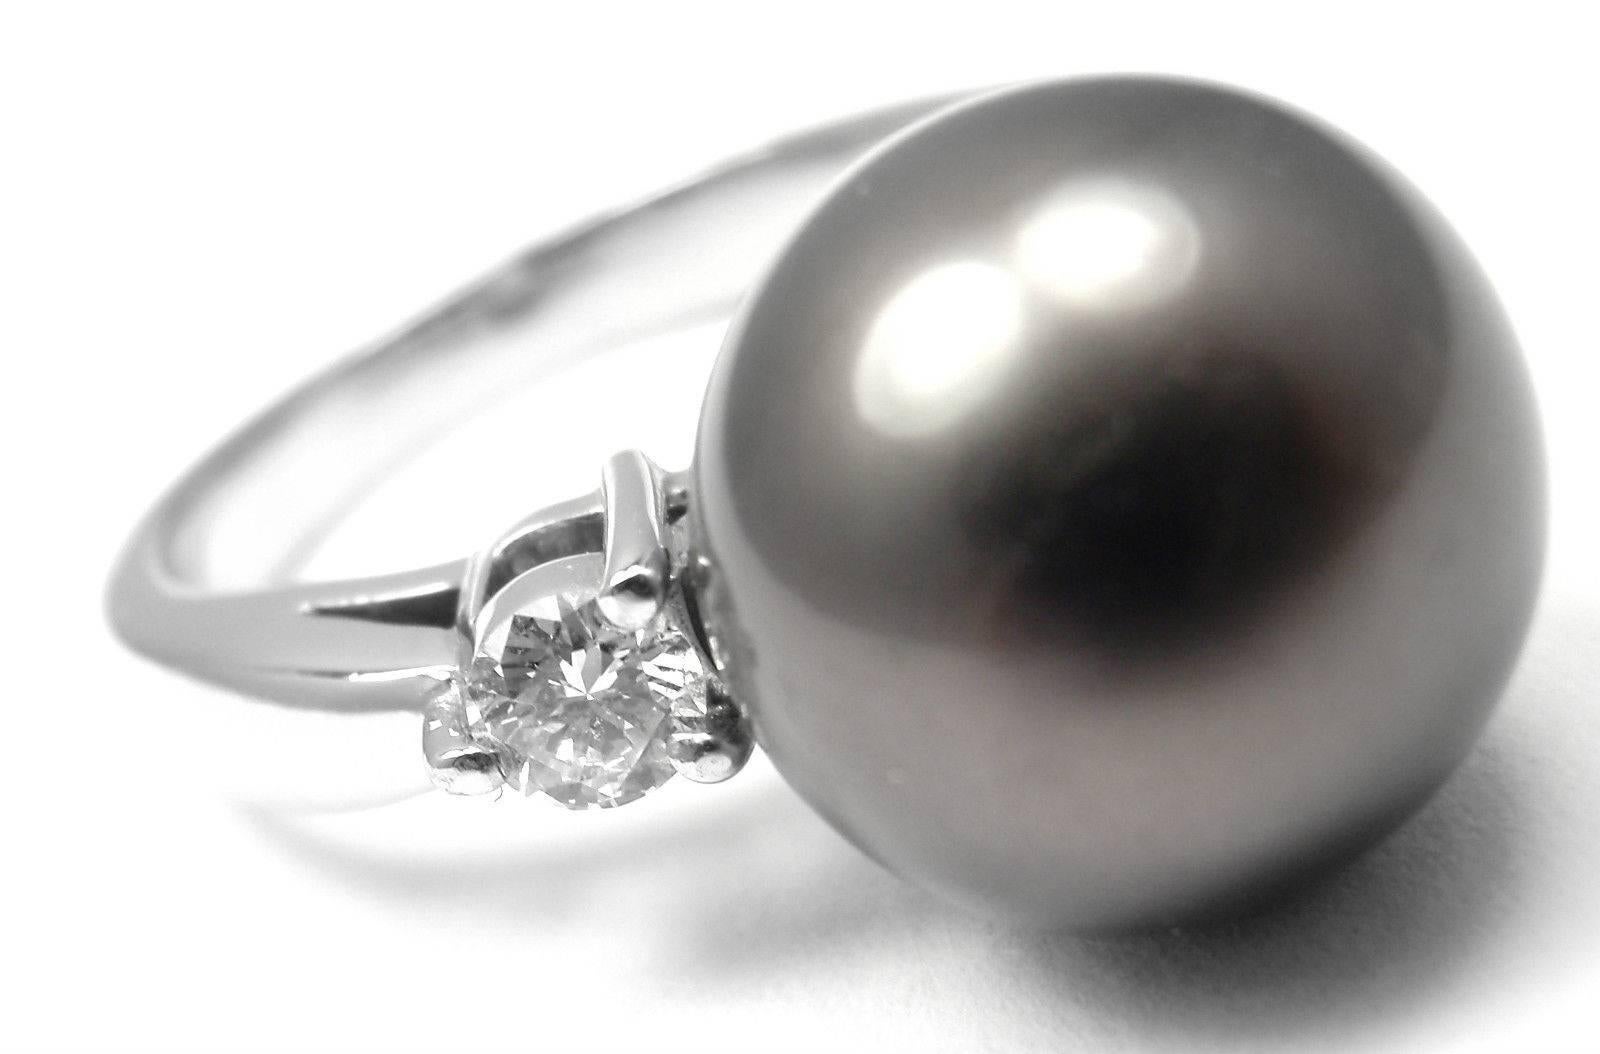 Platinum Diamond Large 11.5mm Tahitian Pearl Ring by Mikimoto. 
With 2x round brilliant cut diamonds VS1 clarity, G color total weight 
approx. 0.28ct and one 11.5mm high luster tahitian pearl 

Details: 
Ring Size: 5.5, Resize